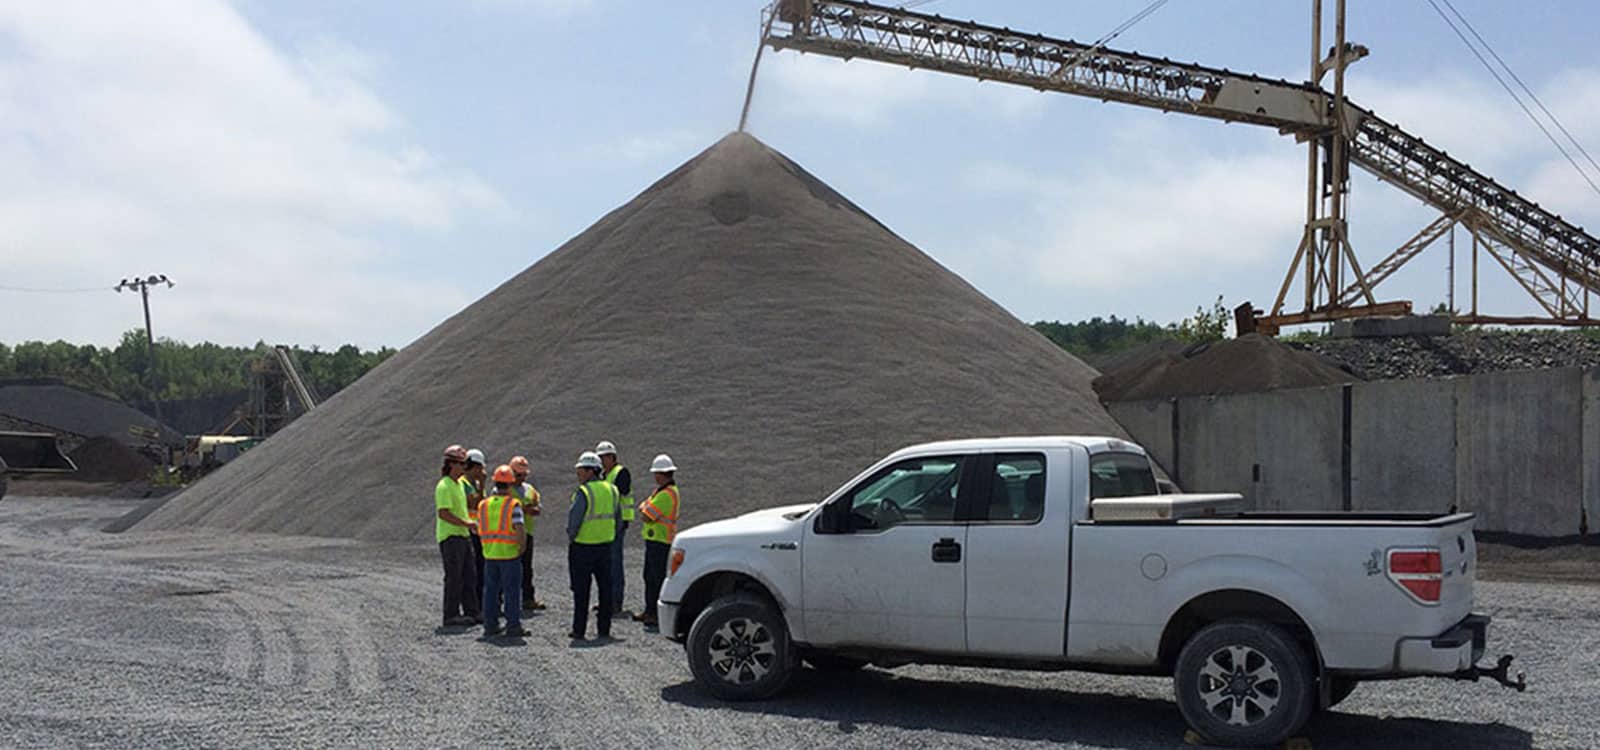 A Record-Breaking Month | Measuring Stockpiles | Stockpile Reports